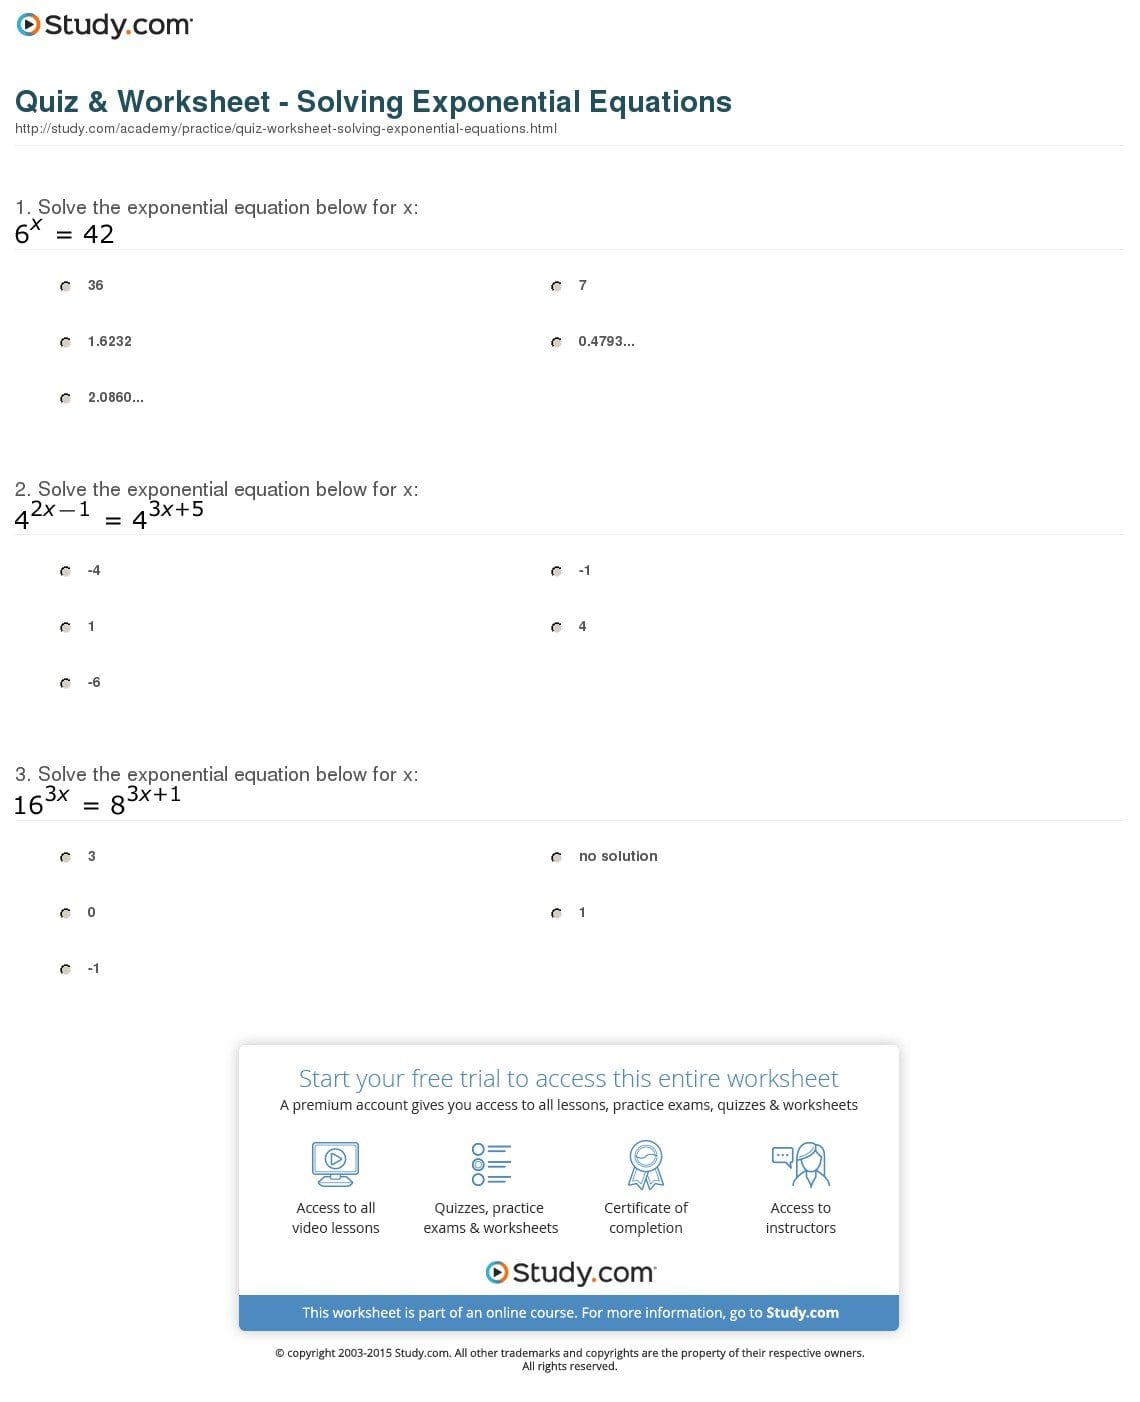 Quiz  Worksheet  Solving Exponential Equations  Study And Solving Exponential Equations With Logarithms Worksheet Answers